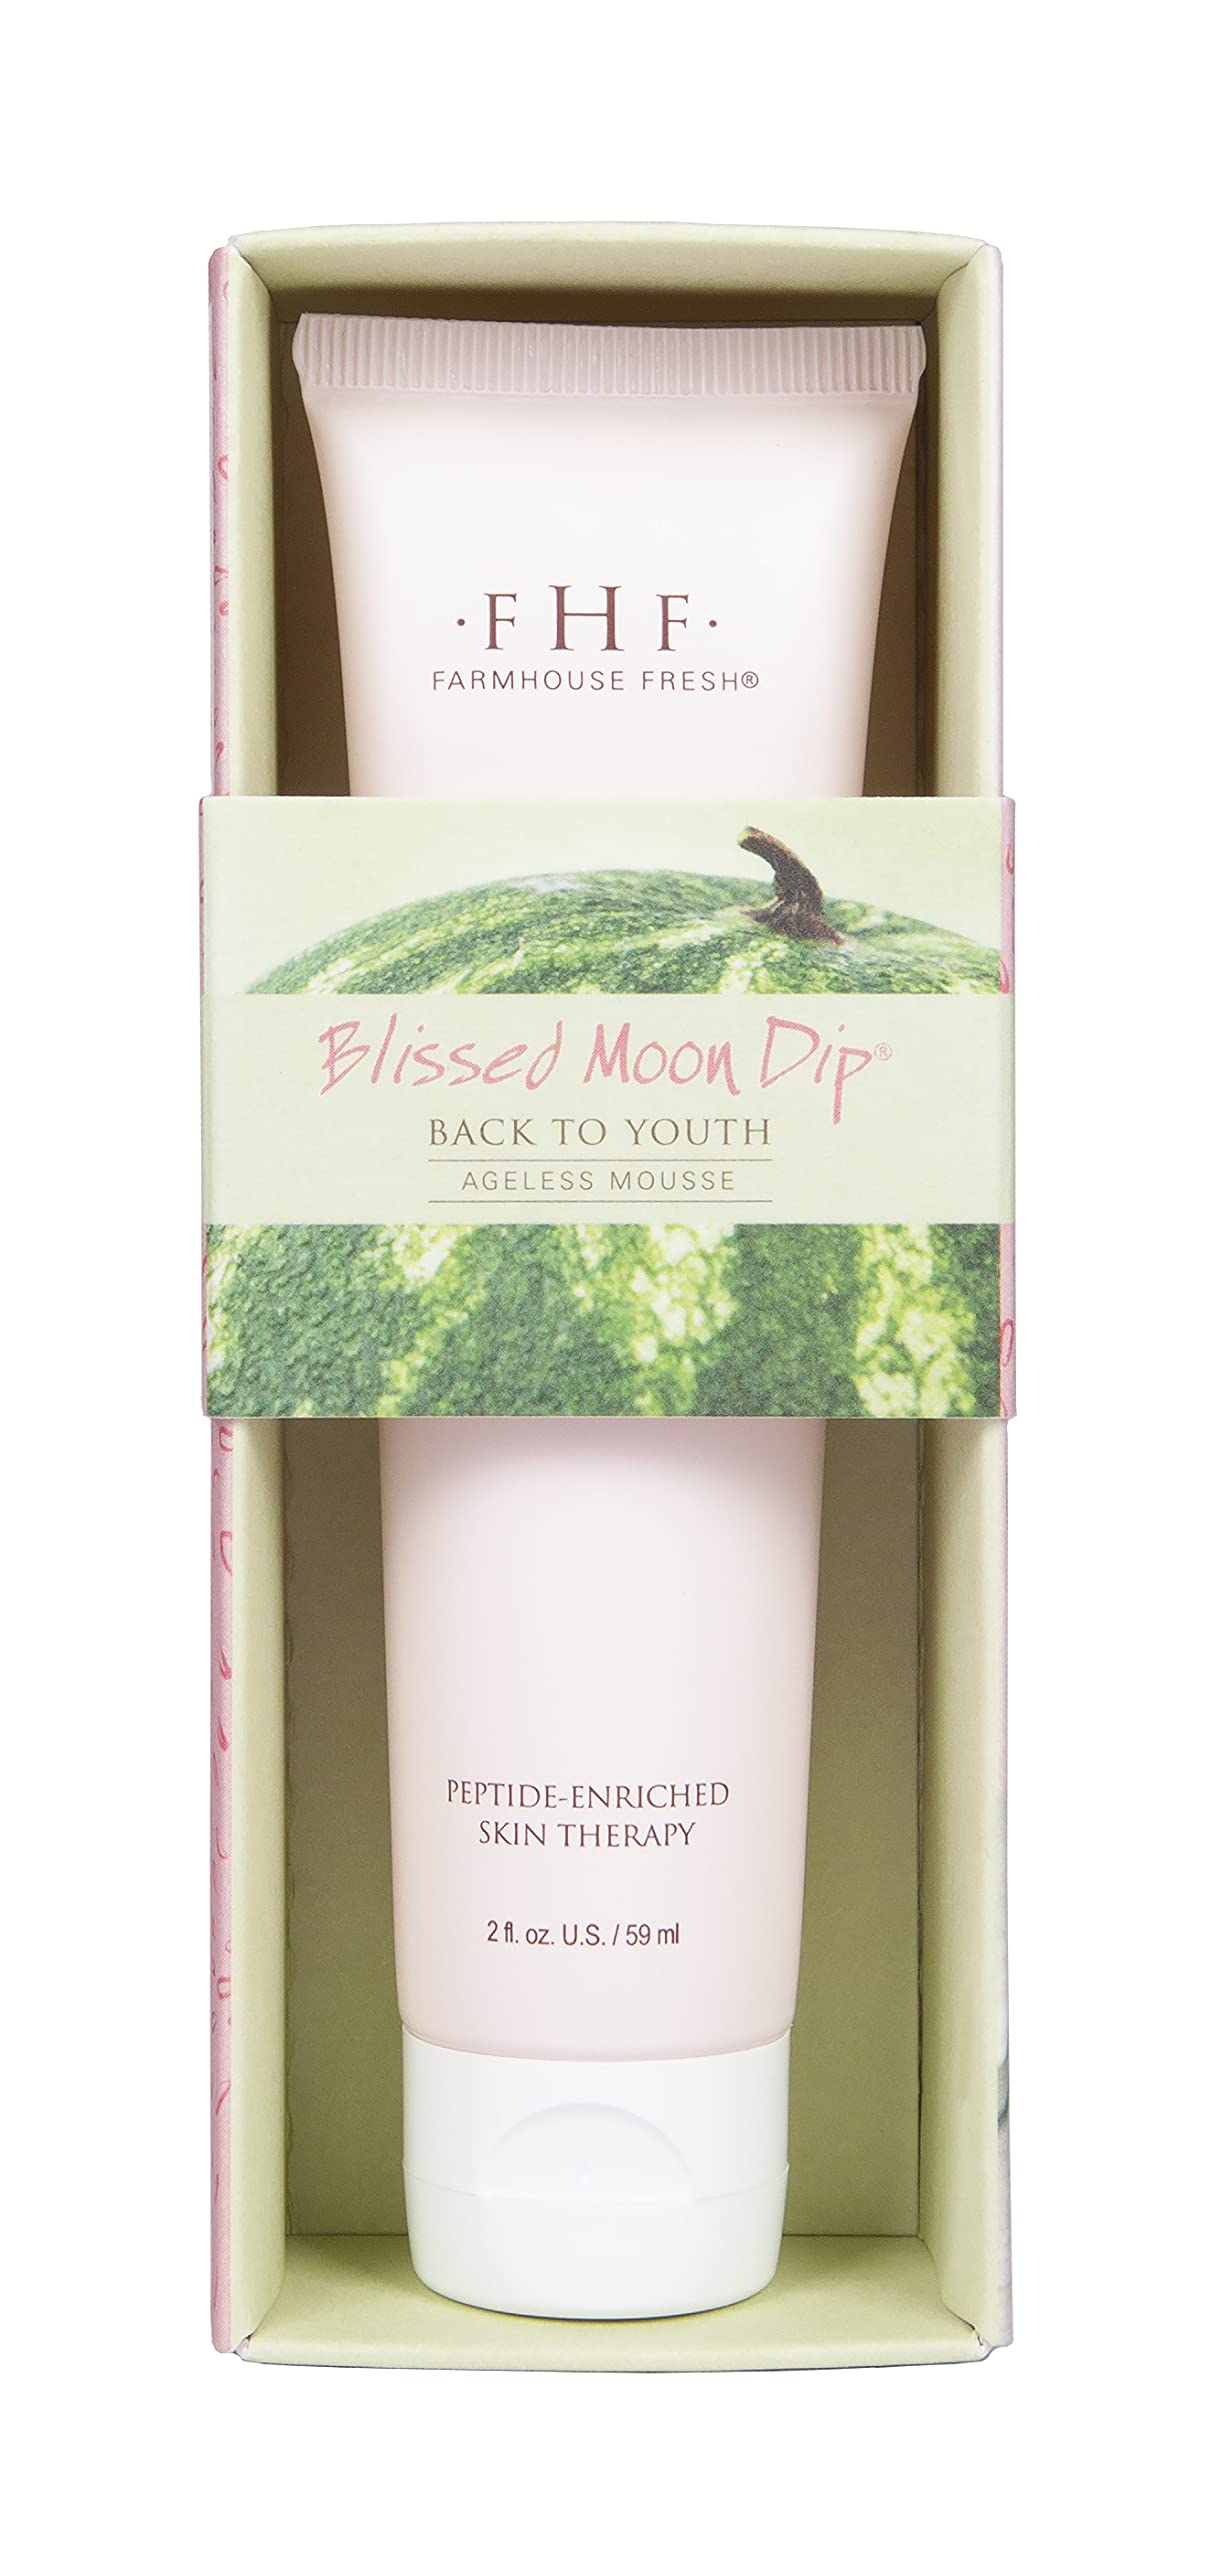 FarmHouse Fresh Blissed Moon Dip Back To Youth Ageless Mousse for Hands, 2 oz.